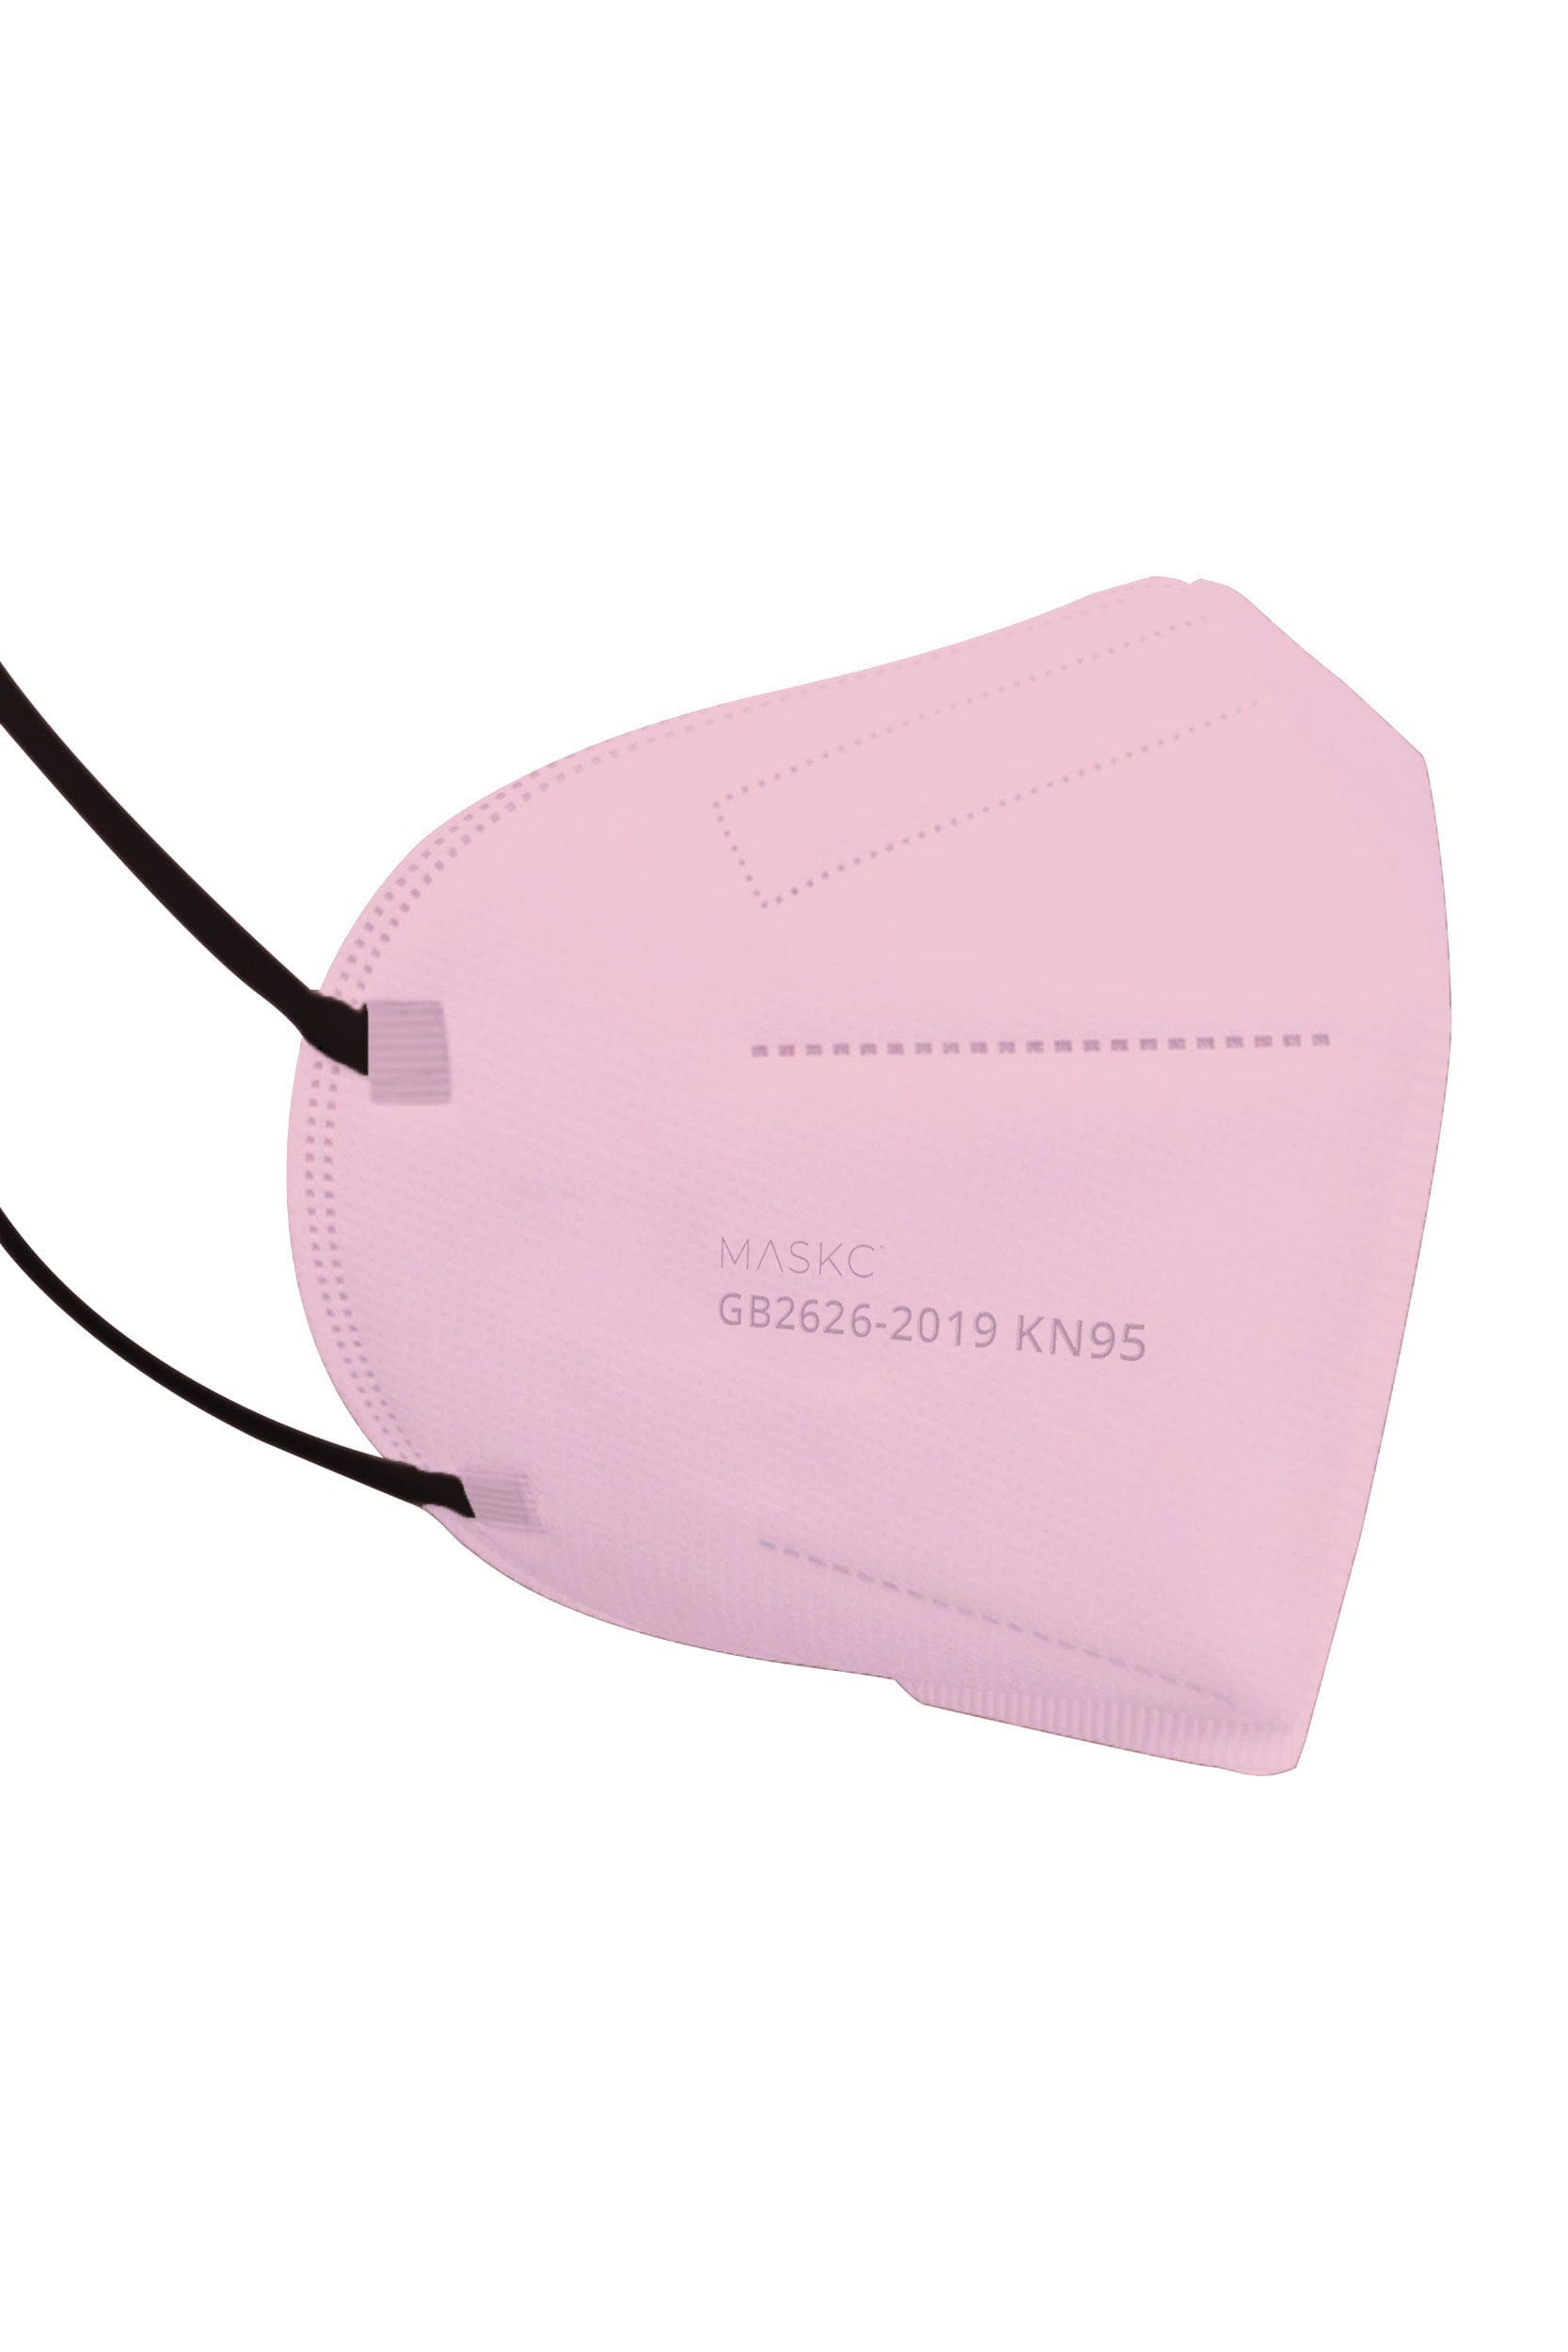 Stylish light pink KN95 face mask, with soft black ear loops and high quality fabric. 